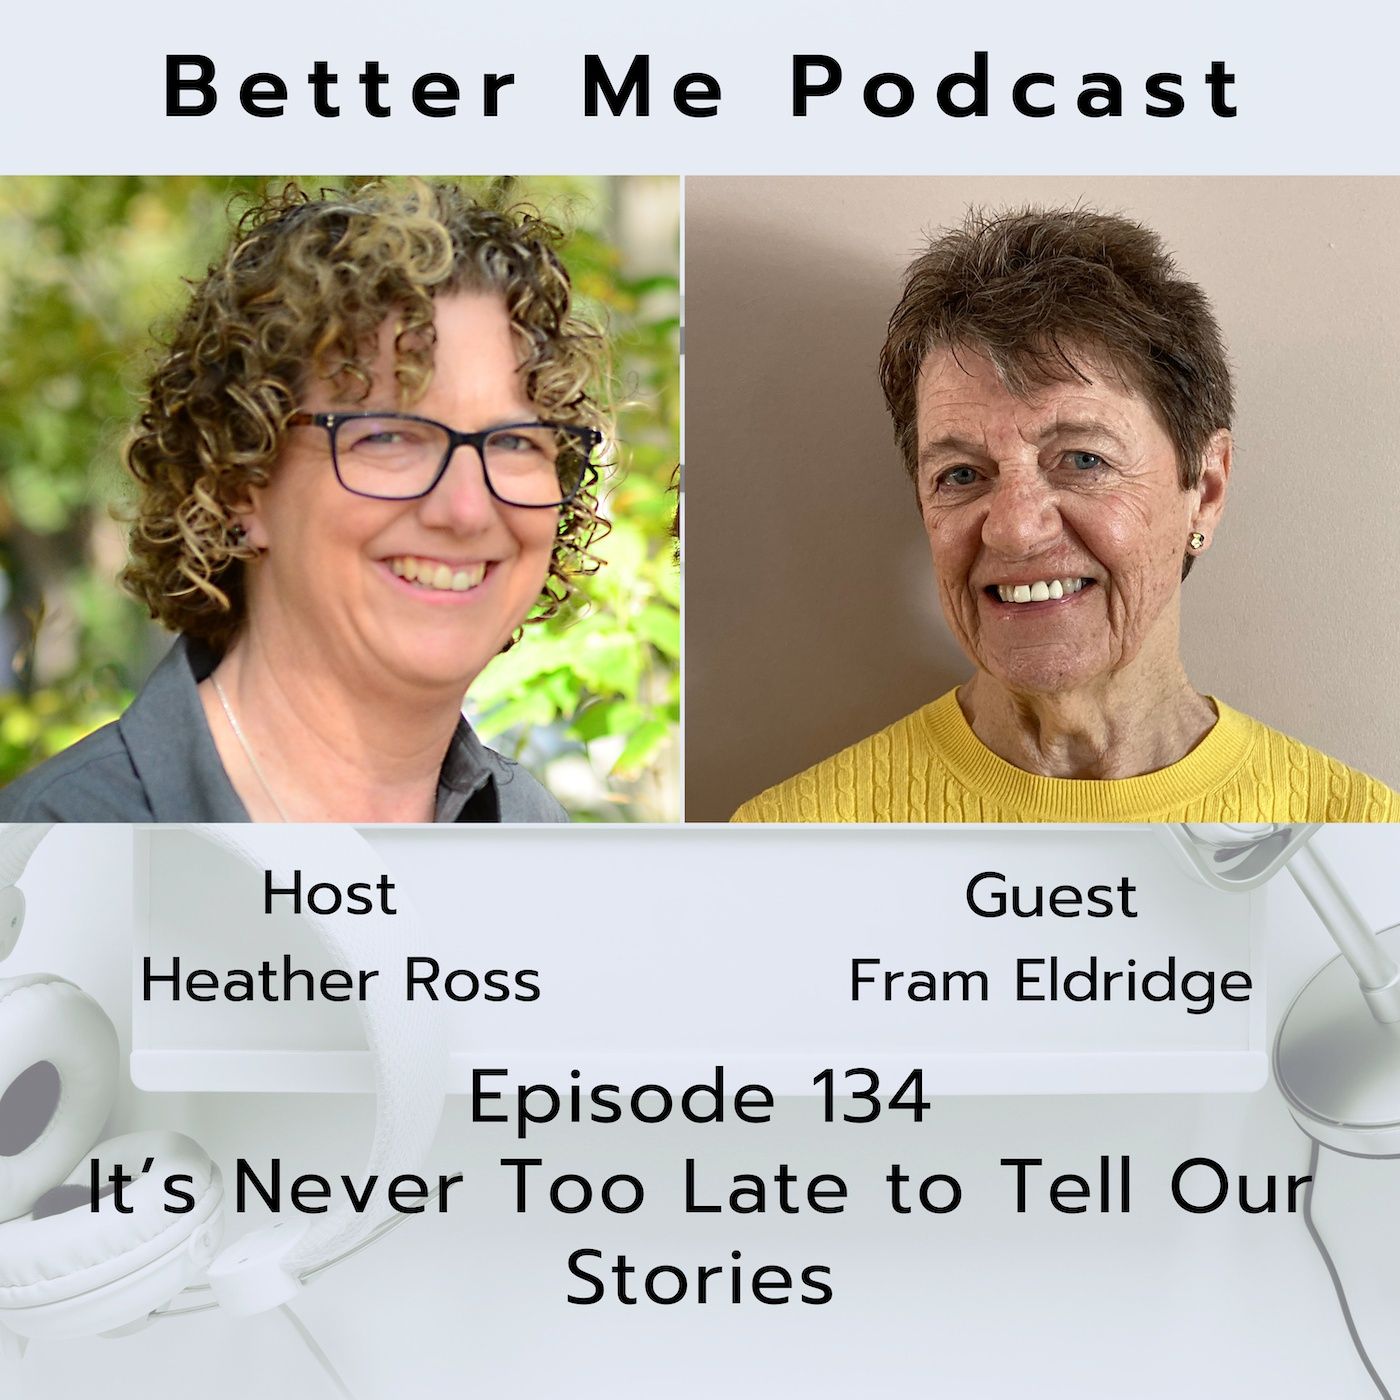 EP 134 It’s Never Too Late to Tell Our Stories (with Fran Eldridge)